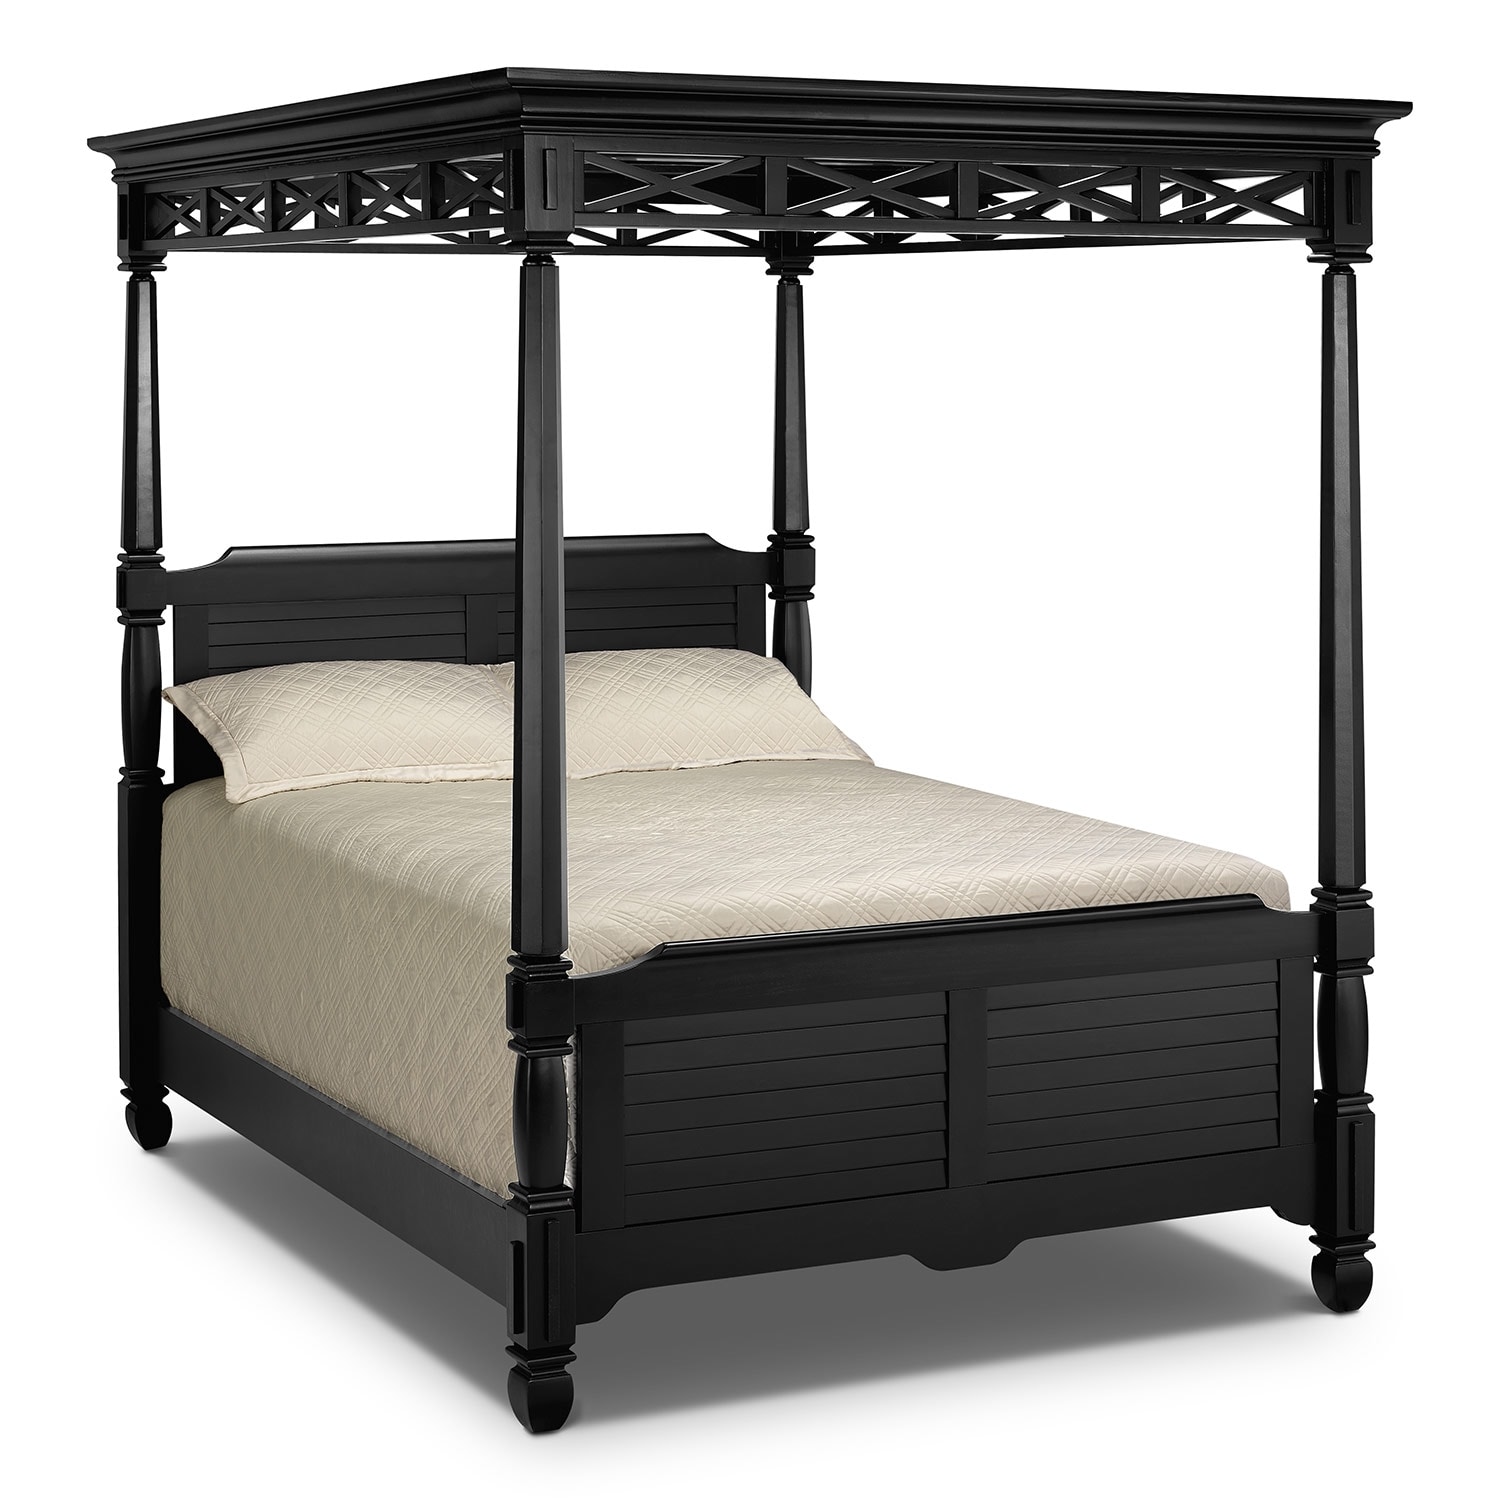 Bedroom Furniture - Plantation Cove Black Canopy Queen Bed